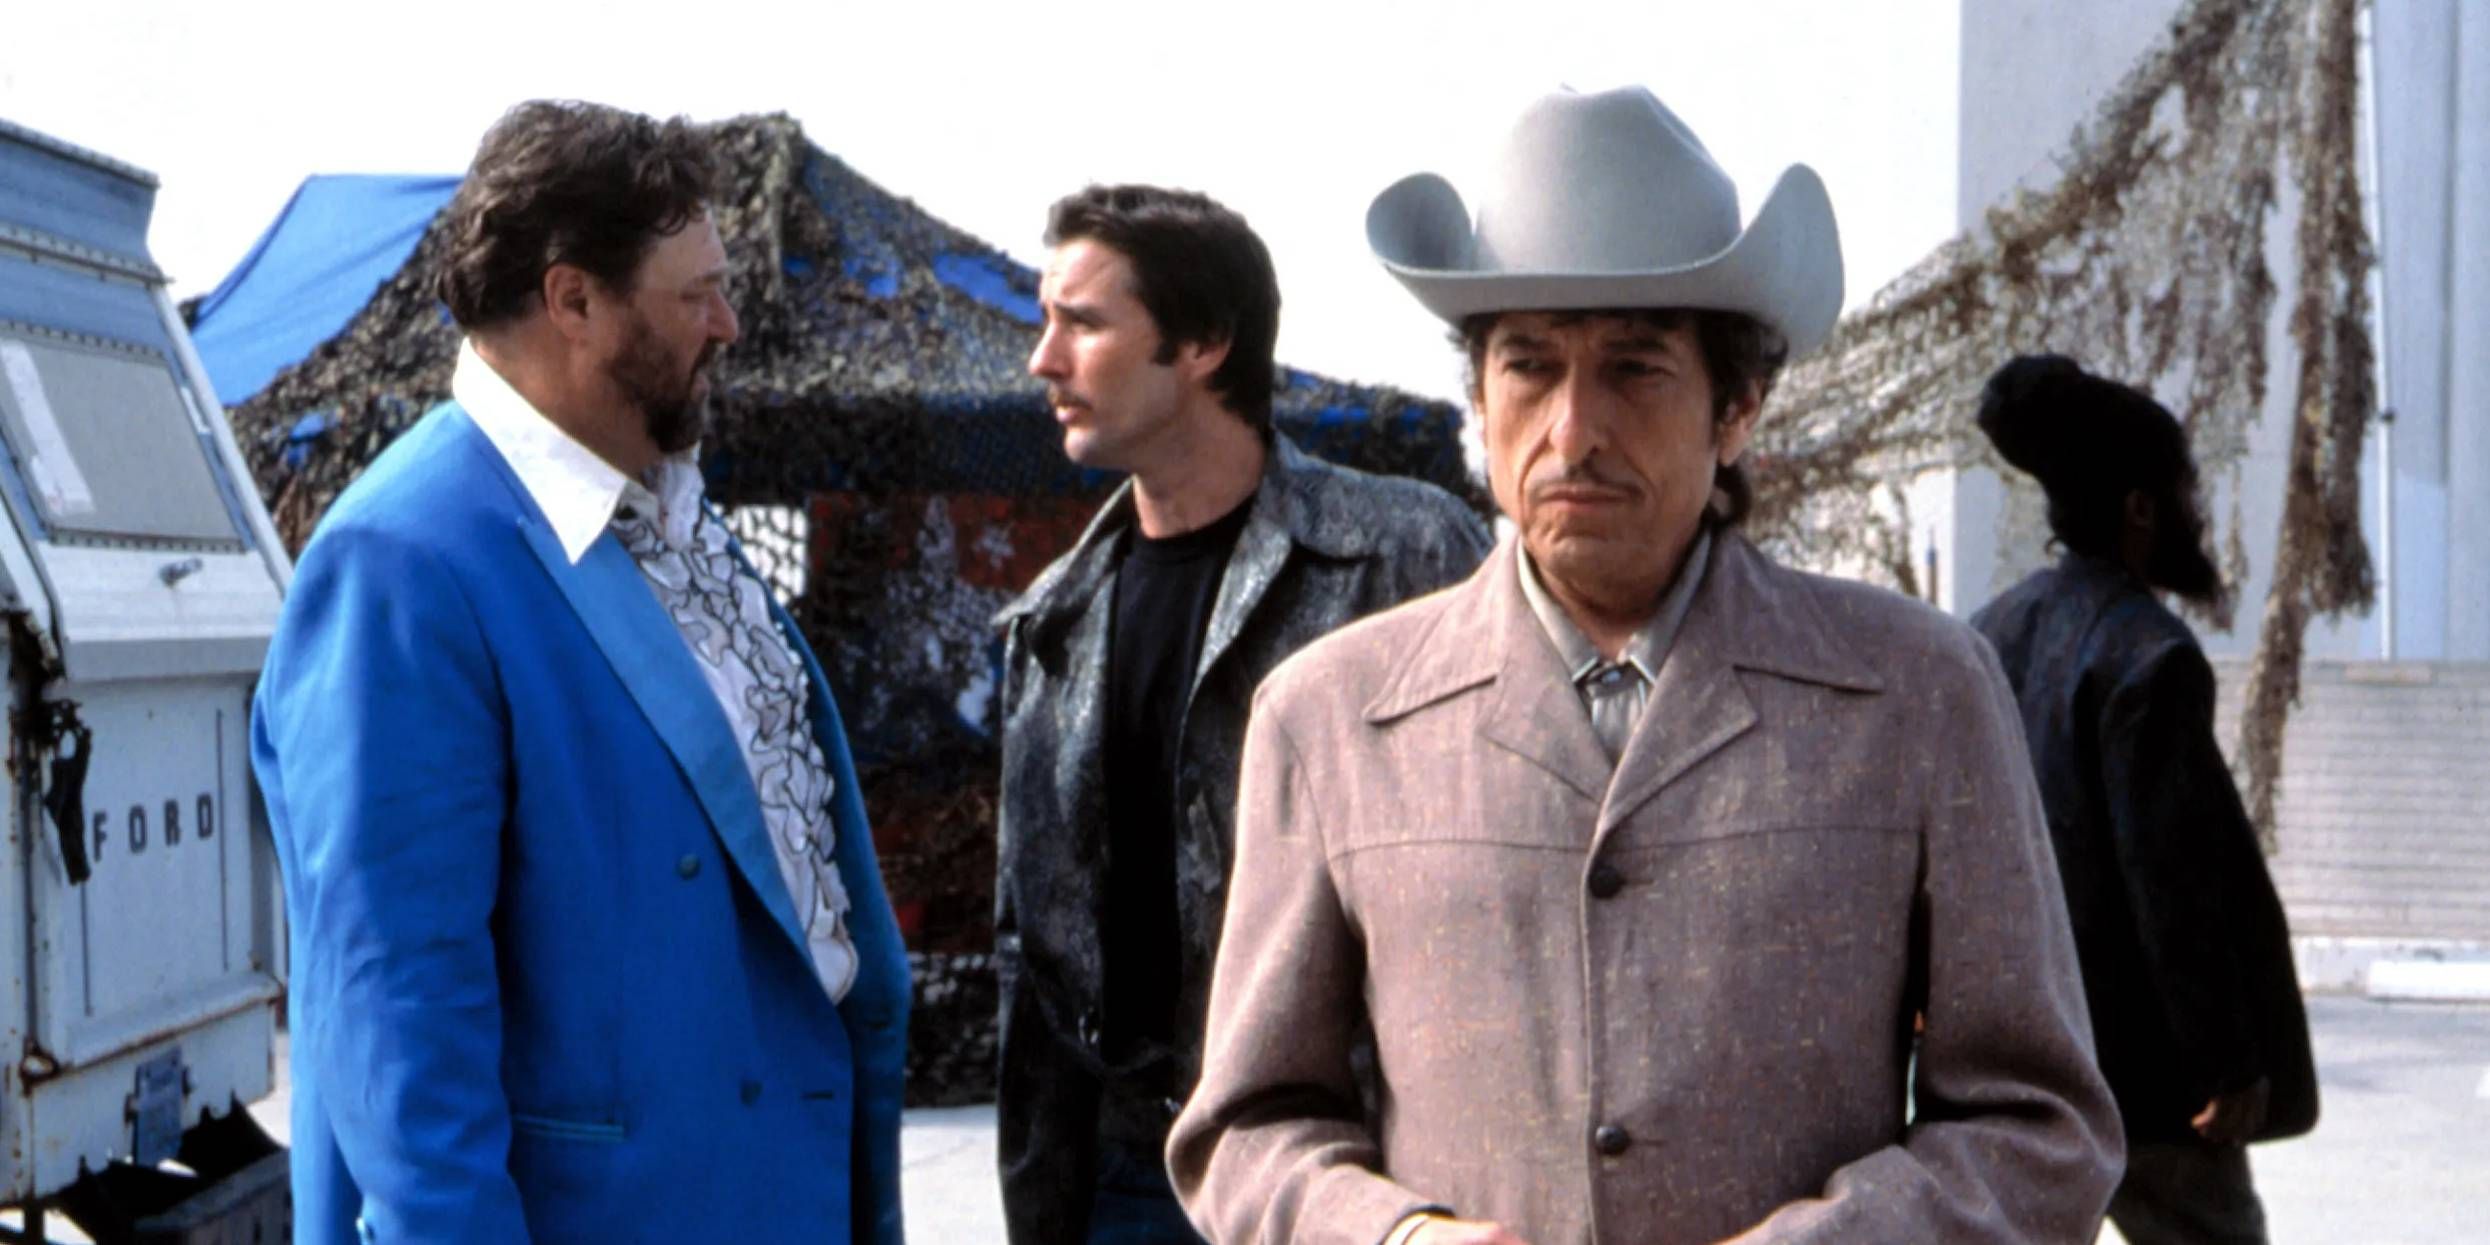 Bob Dylan, John Goodman, and Luke Wilson in "Masked and Anonymous"